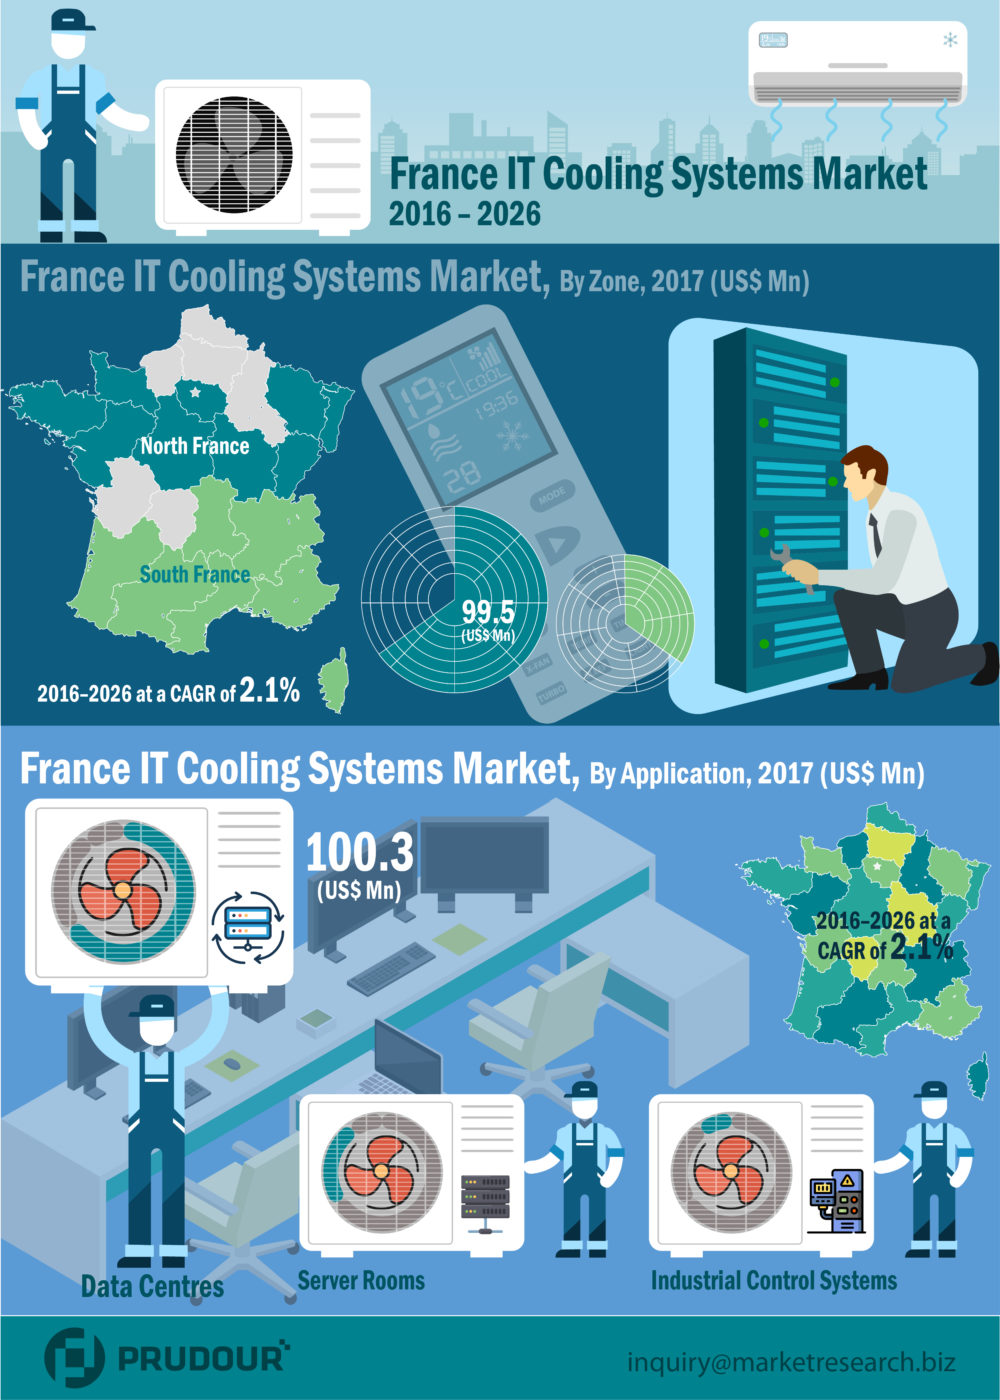 CAGR Of 2.1%: France IT Cooling Systems Market projected CAGR of 2.1% from 2017 to 2026